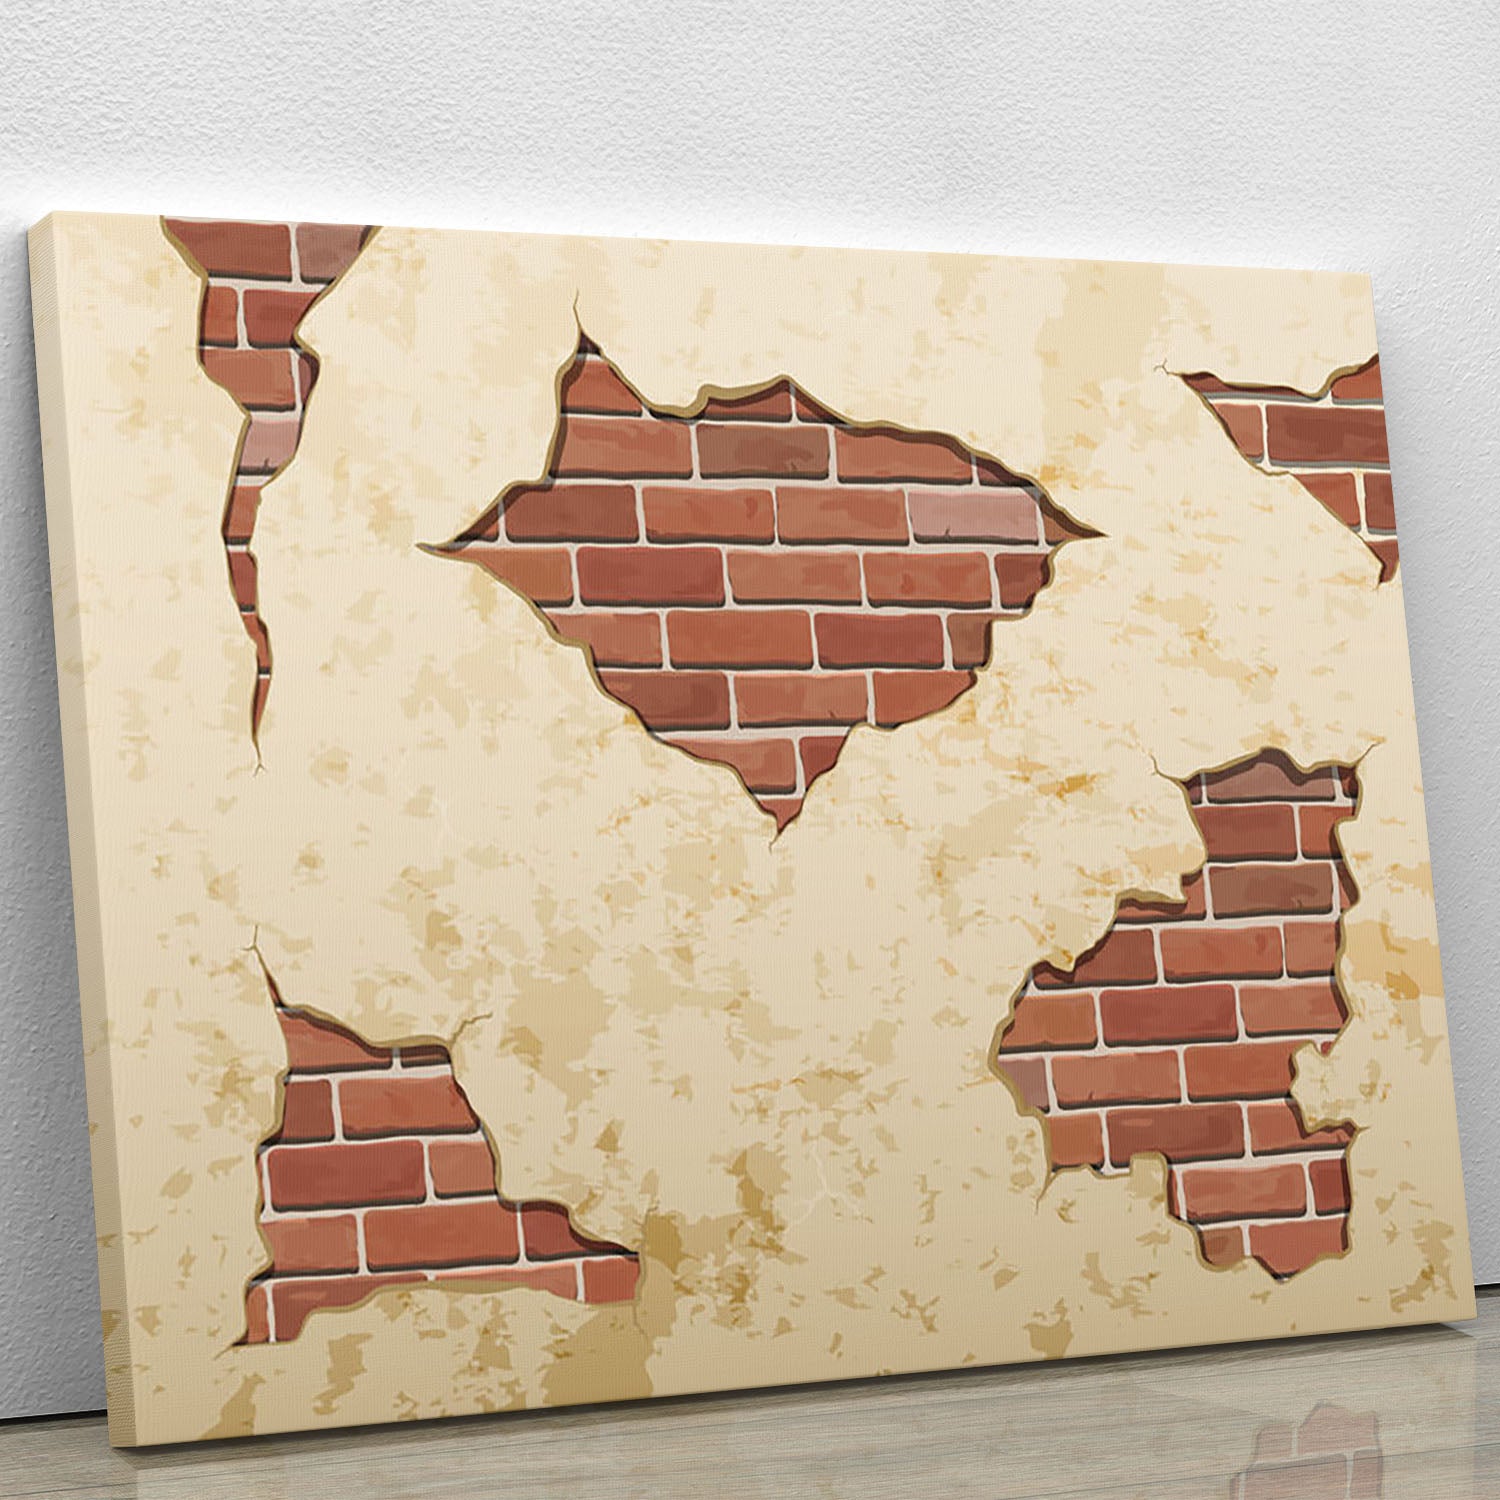 The old shabby concrete and brick cracks Canvas Print or Poster - Canvas Art Rocks - 1